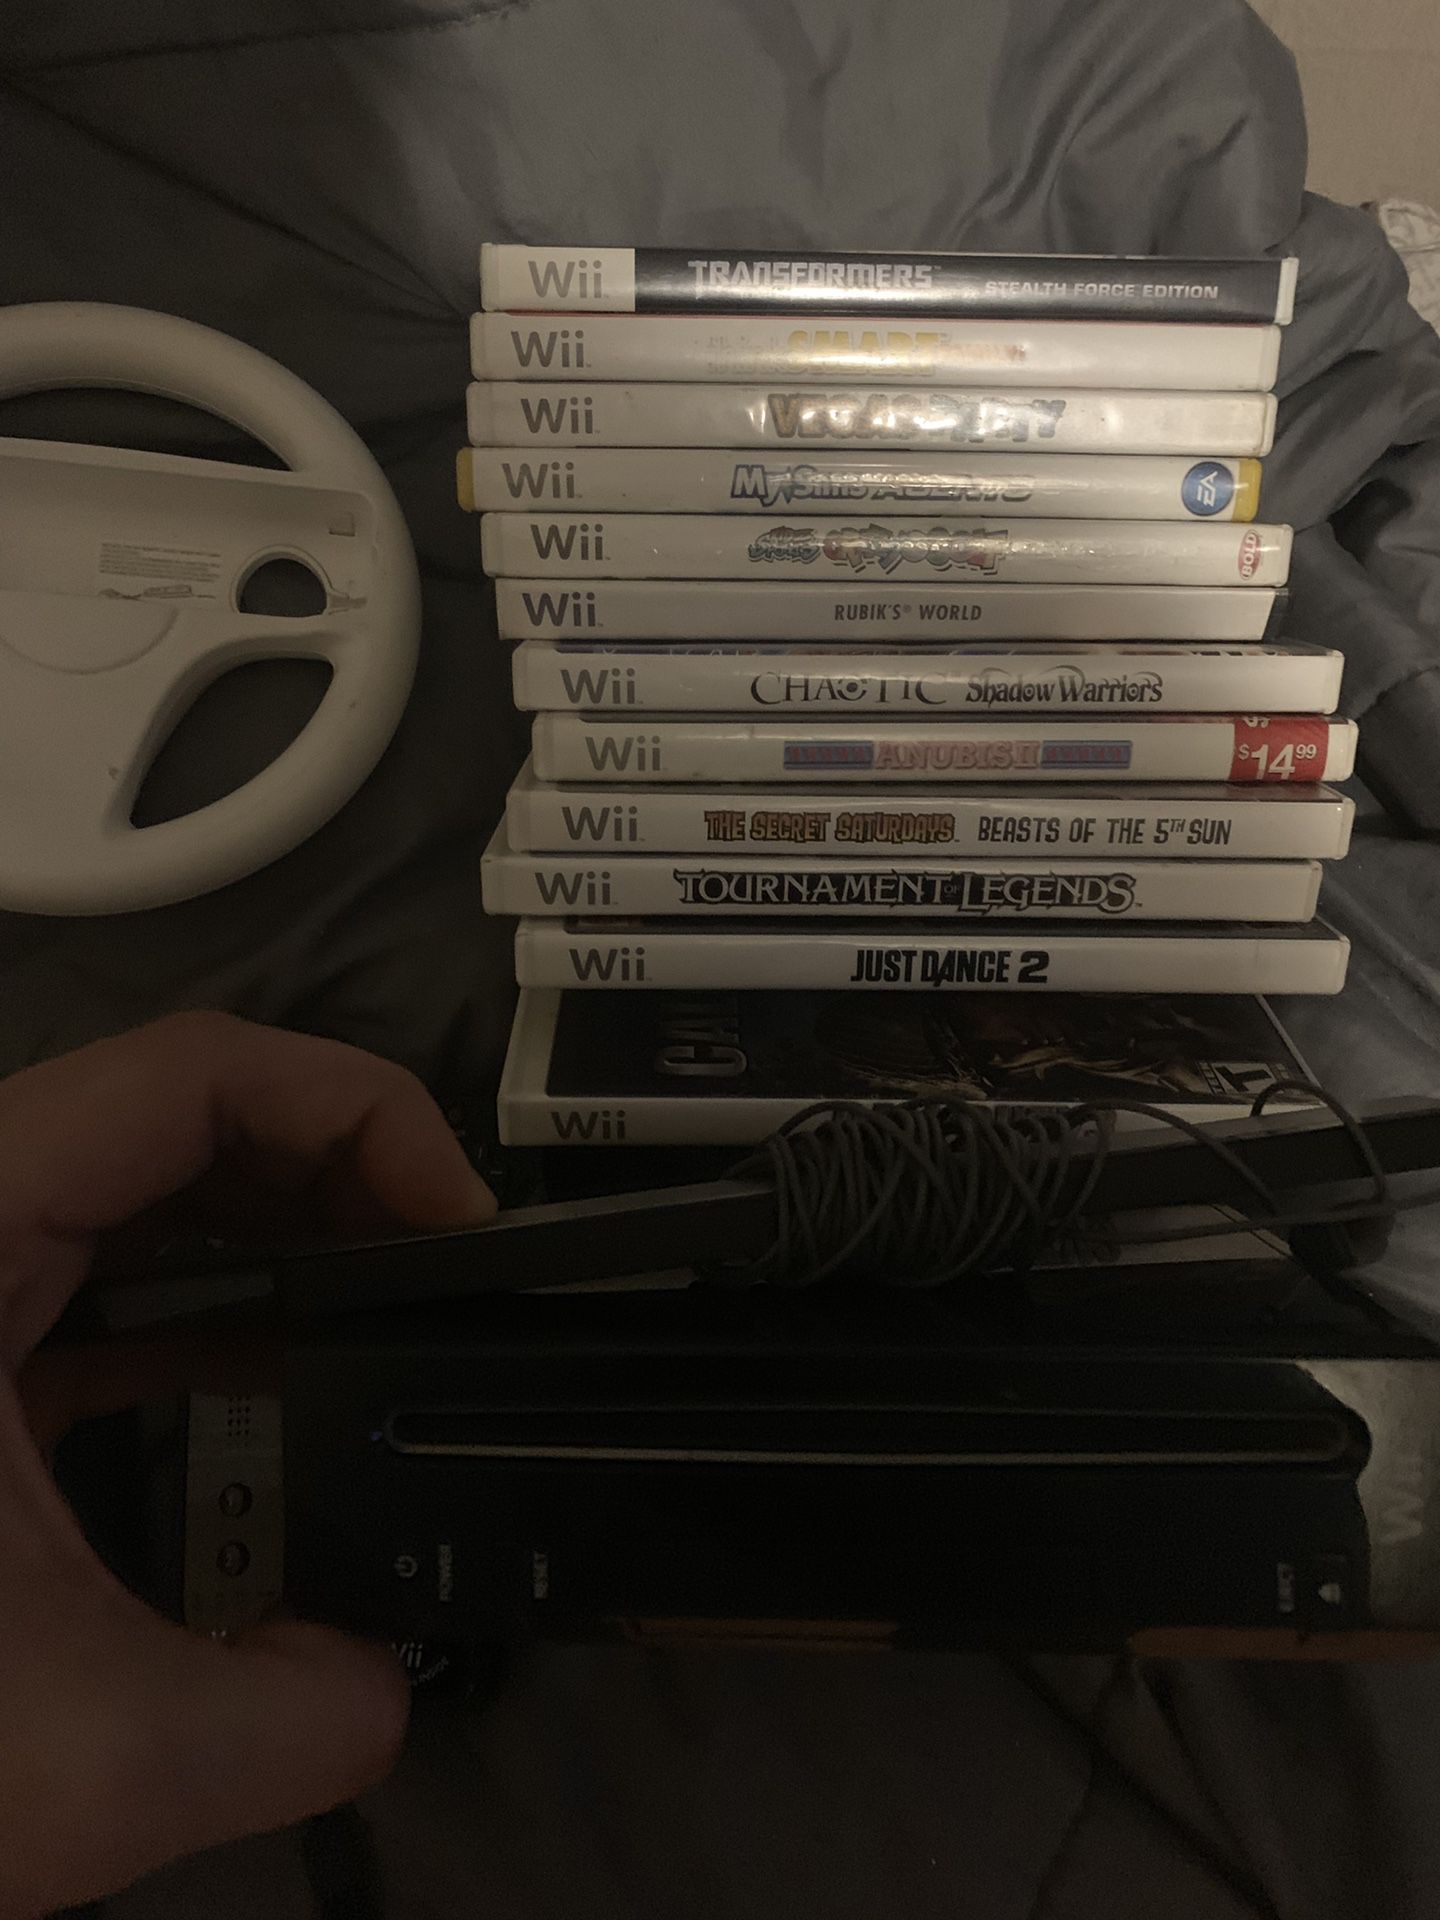 Nintendo wii (first generation) GameCube compatible. Two game systems in one. Comes with 3 wireless remotes, 1 nunchuck, a steering wheel & 12 games